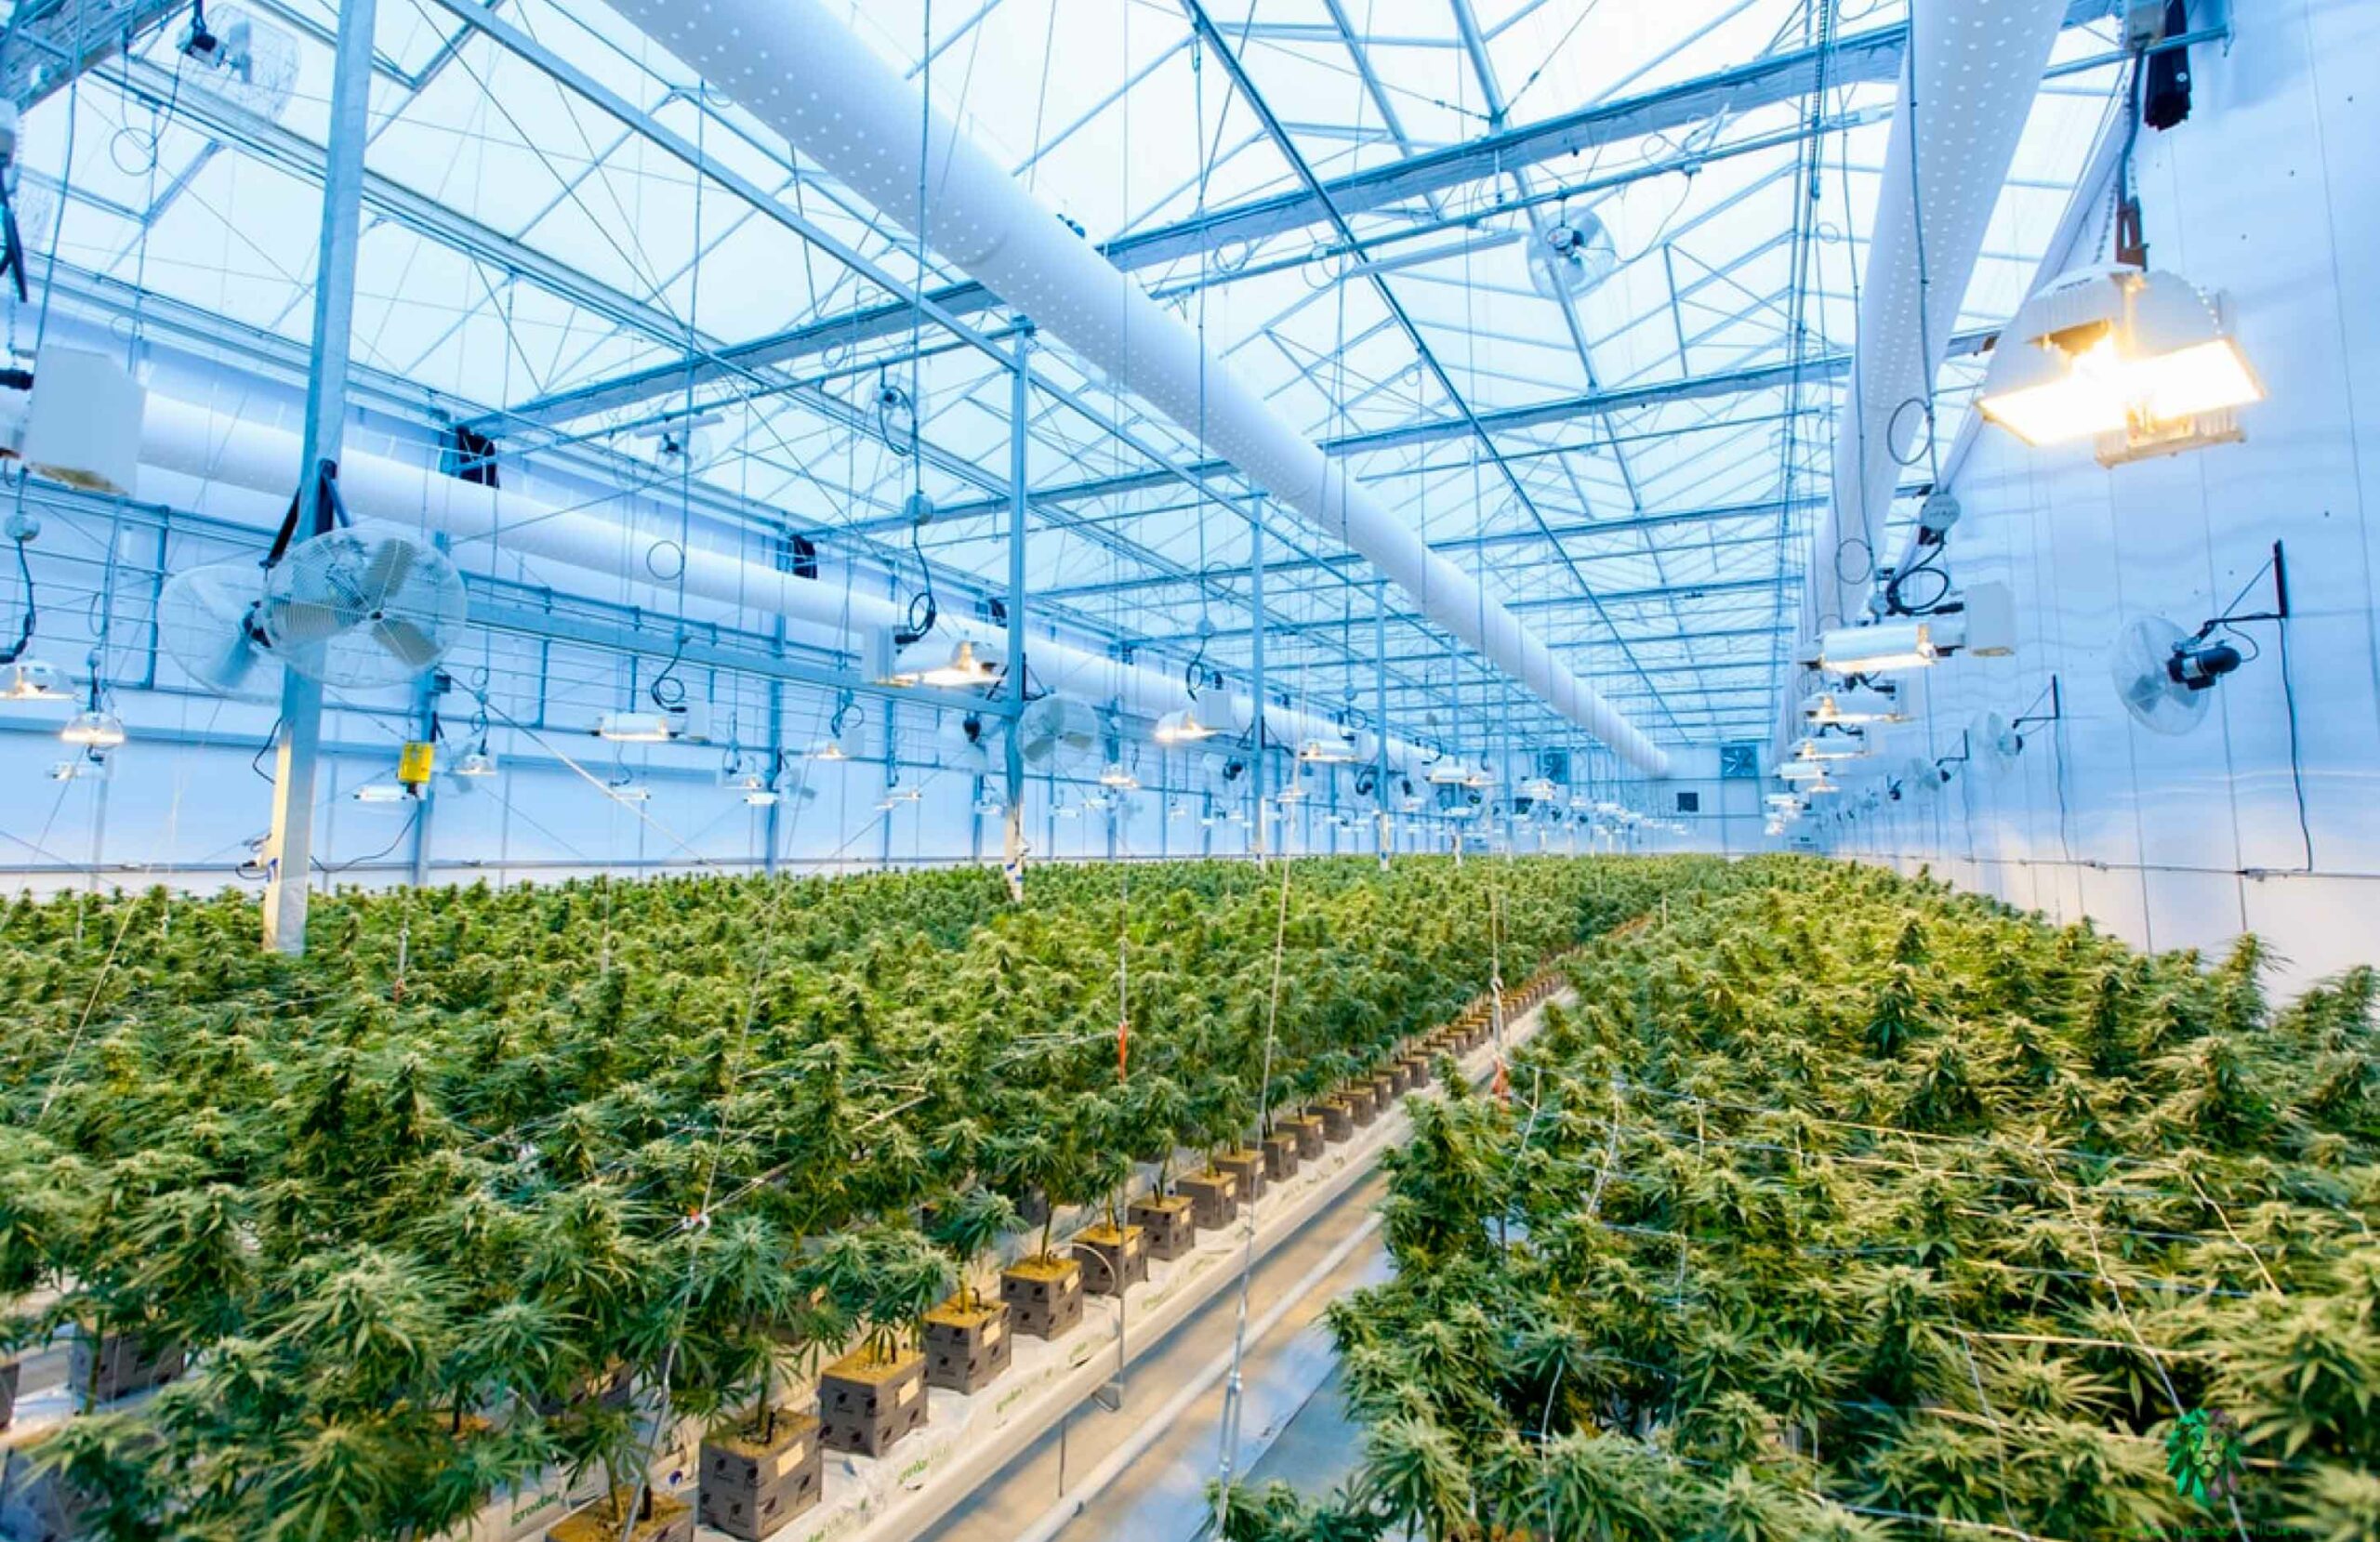 standard Cannabis cultivation license. Greenhouse with sungrown cannabis plants